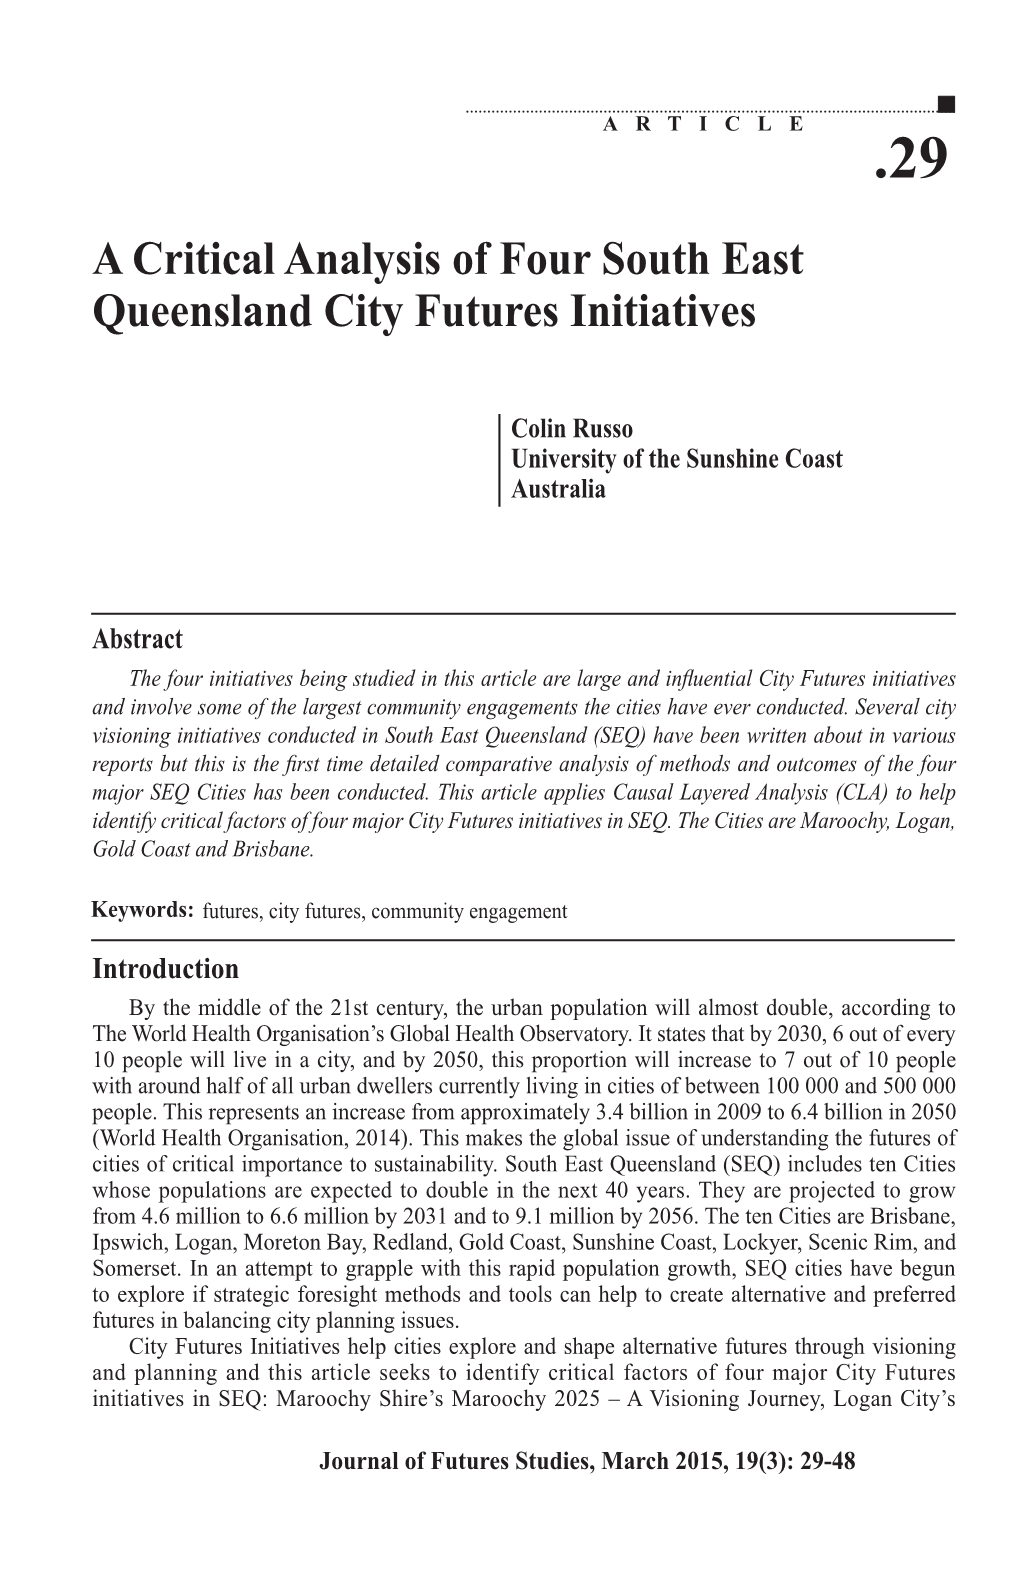 A Critical Analysis of Four South East Queensland City Futures Initiatives